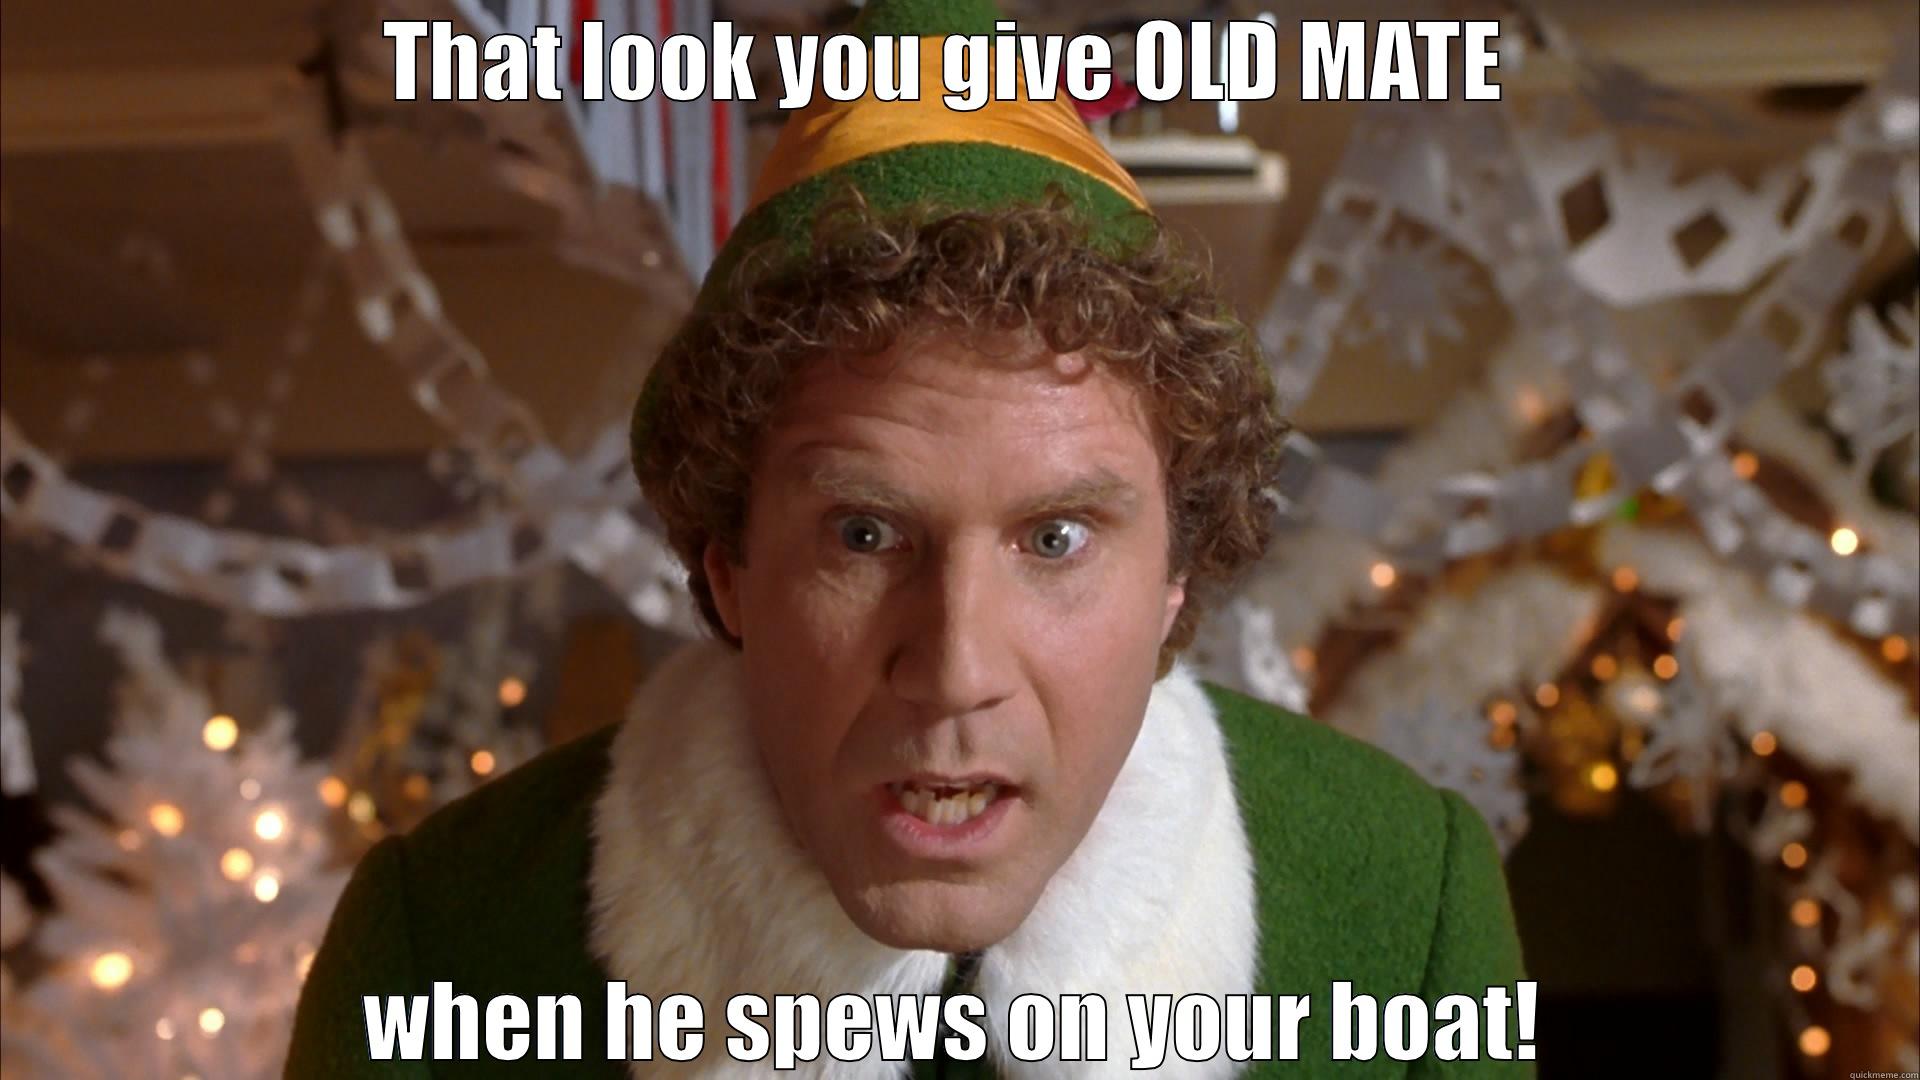 THAT LOOK YOU GIVE OLD MATE  WHEN HE SPEWS ON YOUR BOAT! Misc